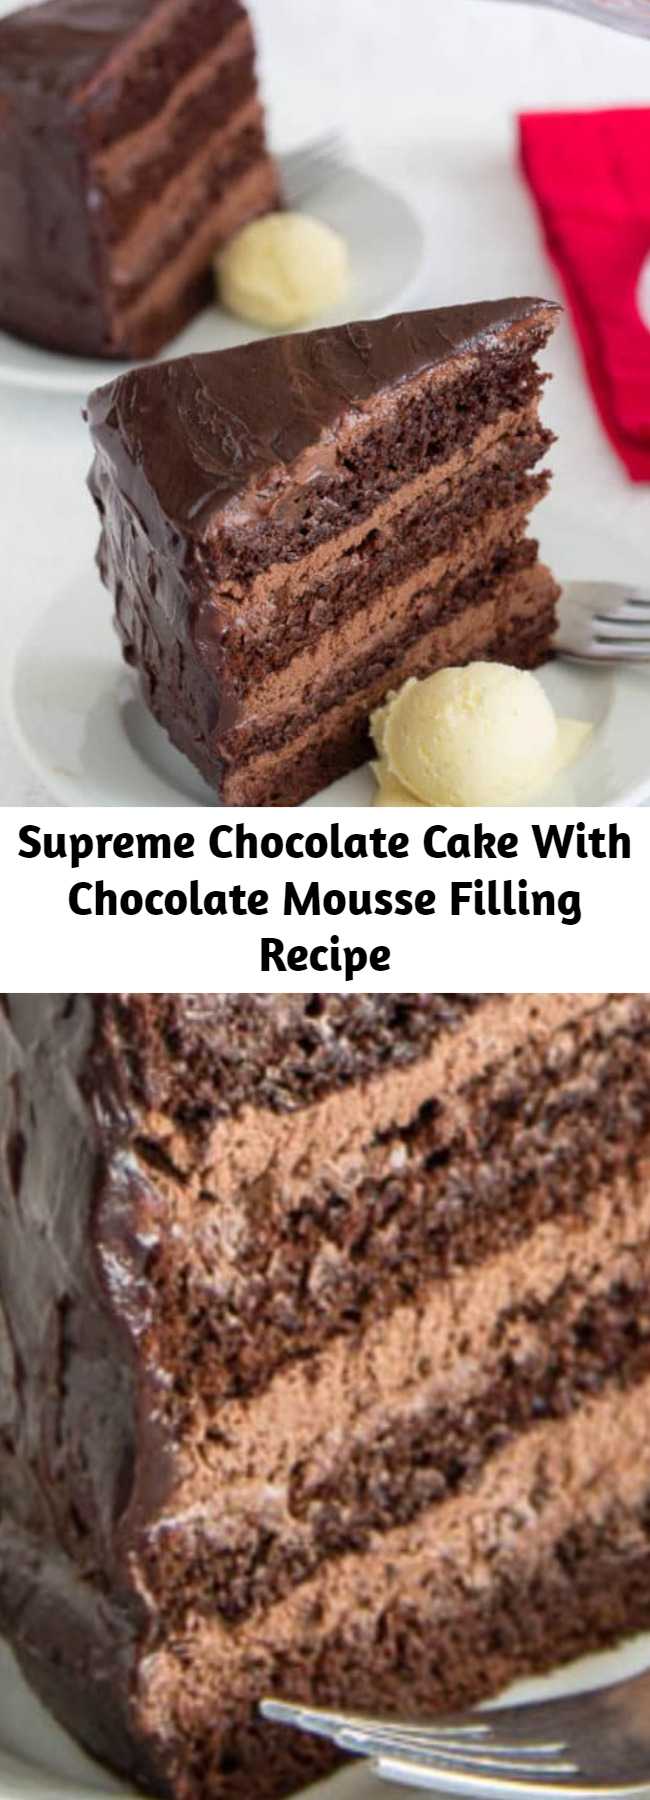 Supreme Chocolate Cake With Chocolate Mousse Filling Recipe - For serious chocolate lovers! This decadent chocolate cake with chocolate mousse filling is THE thing to satisfy your chocolate craving!